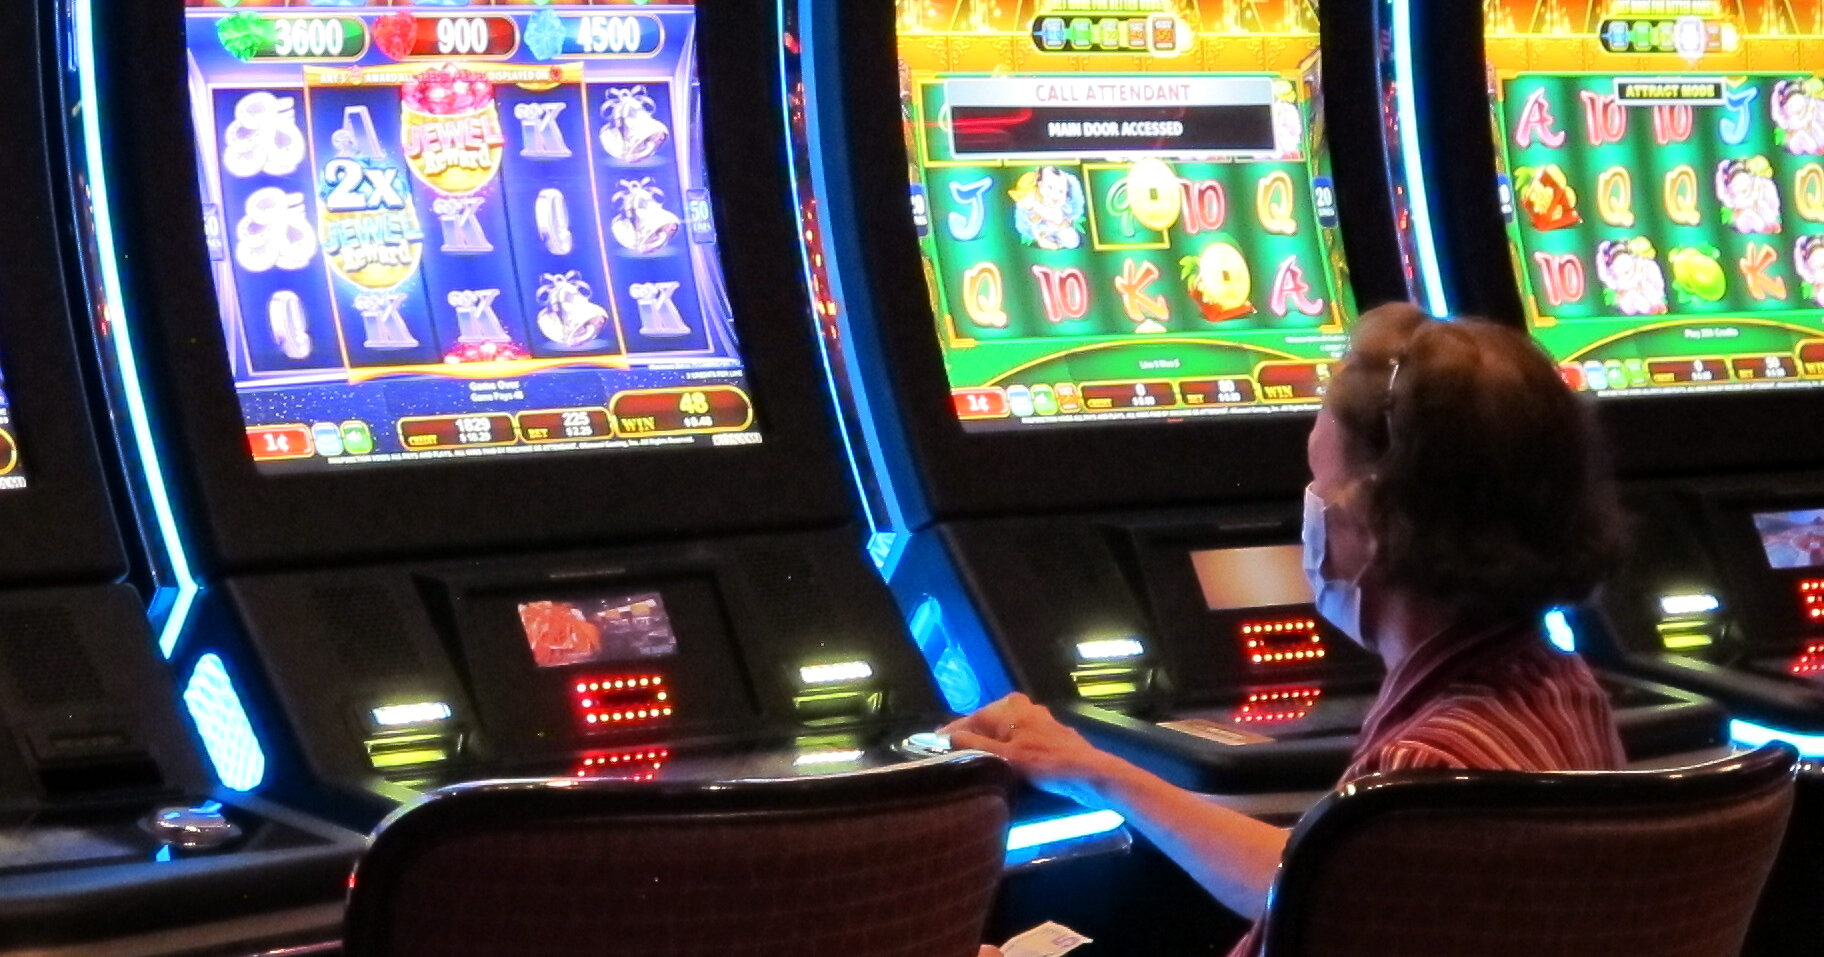 A woman plays a slot machine at the Golden Nugget casino in Atlantic City, New Jersey, on July 2, 2020.